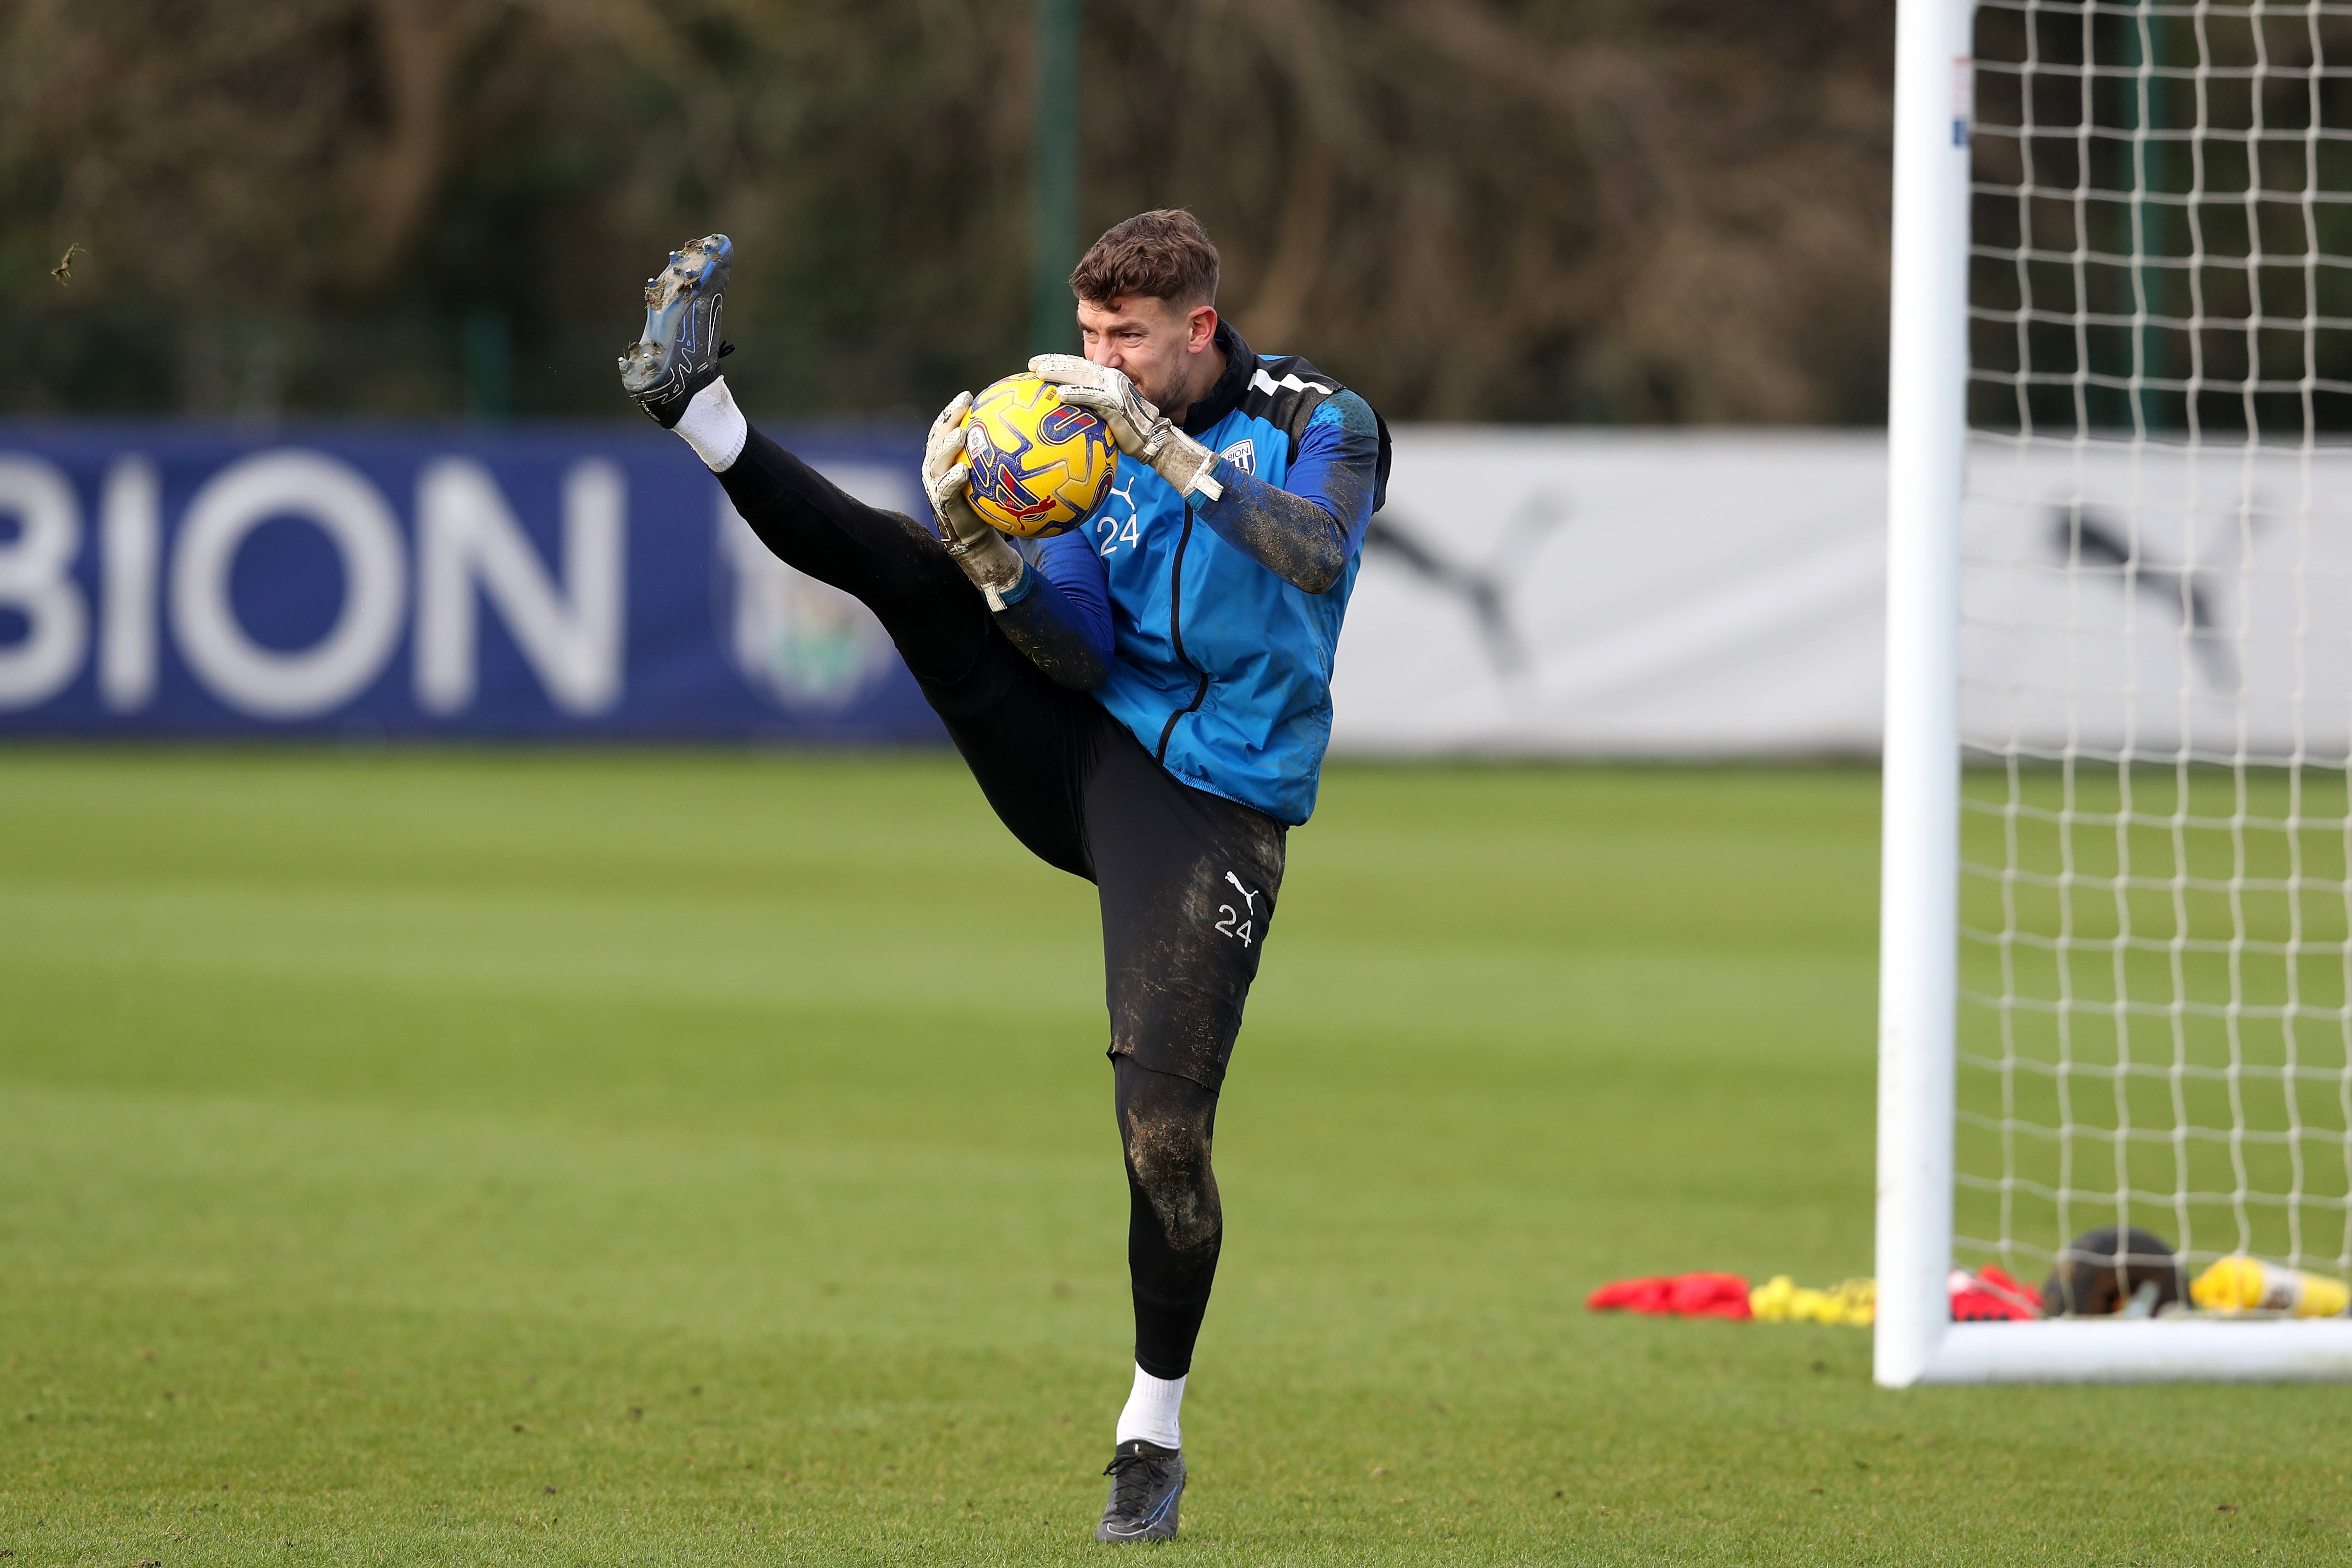 Alex Palmer in training with one of his legs up in the air